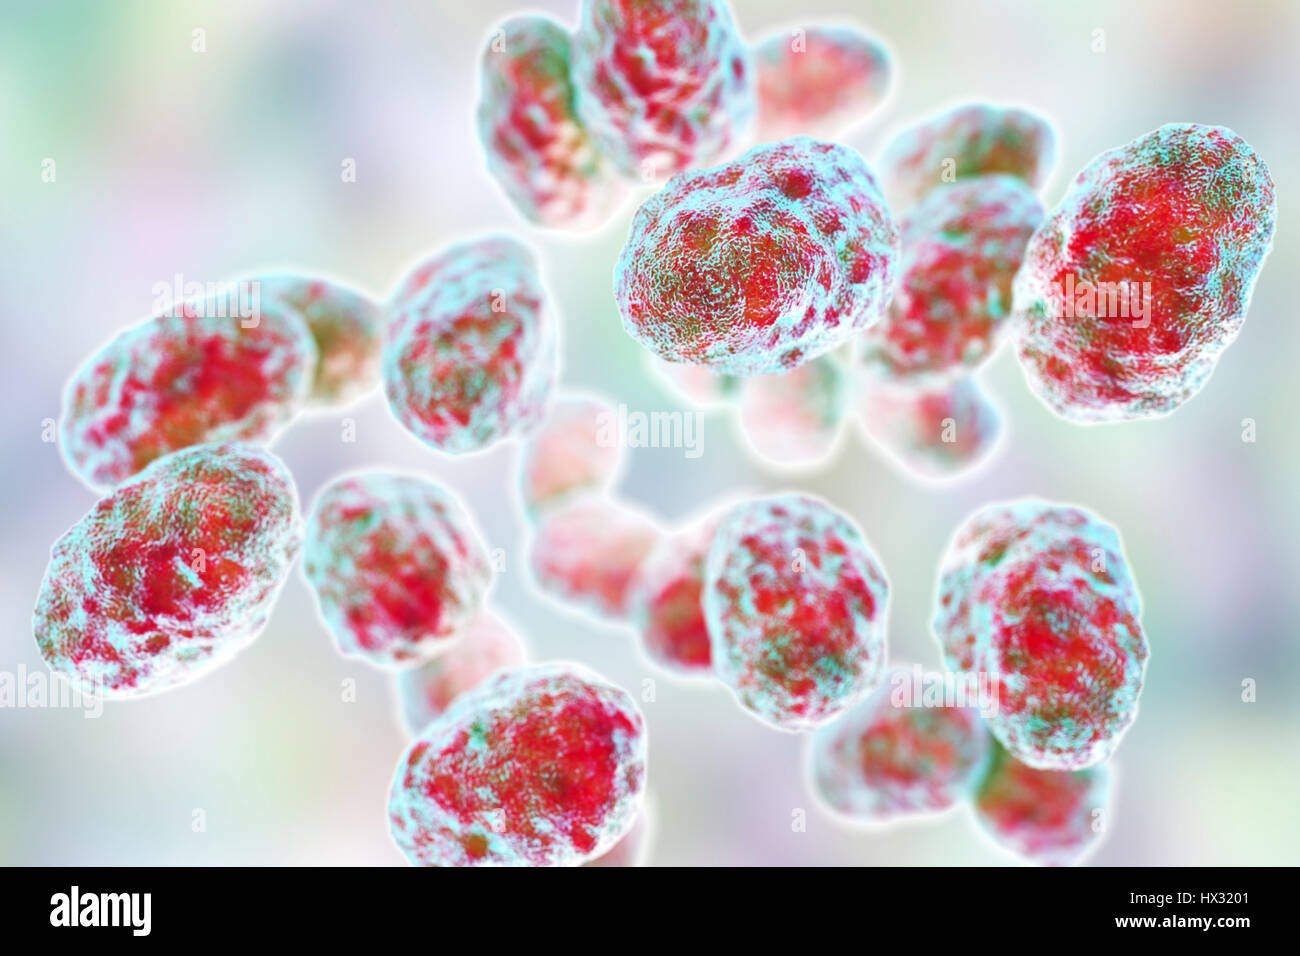 Tularaemia bacteria (Francisella tularensis), illustration. F. tularensis is Gram-negative, coccobacillus prokaryote. A zoonotic microorganism that causes tularaemia, a disease of wild rodents and rabbits that can be transmitted to humans and domesticated pets. Stock Photo